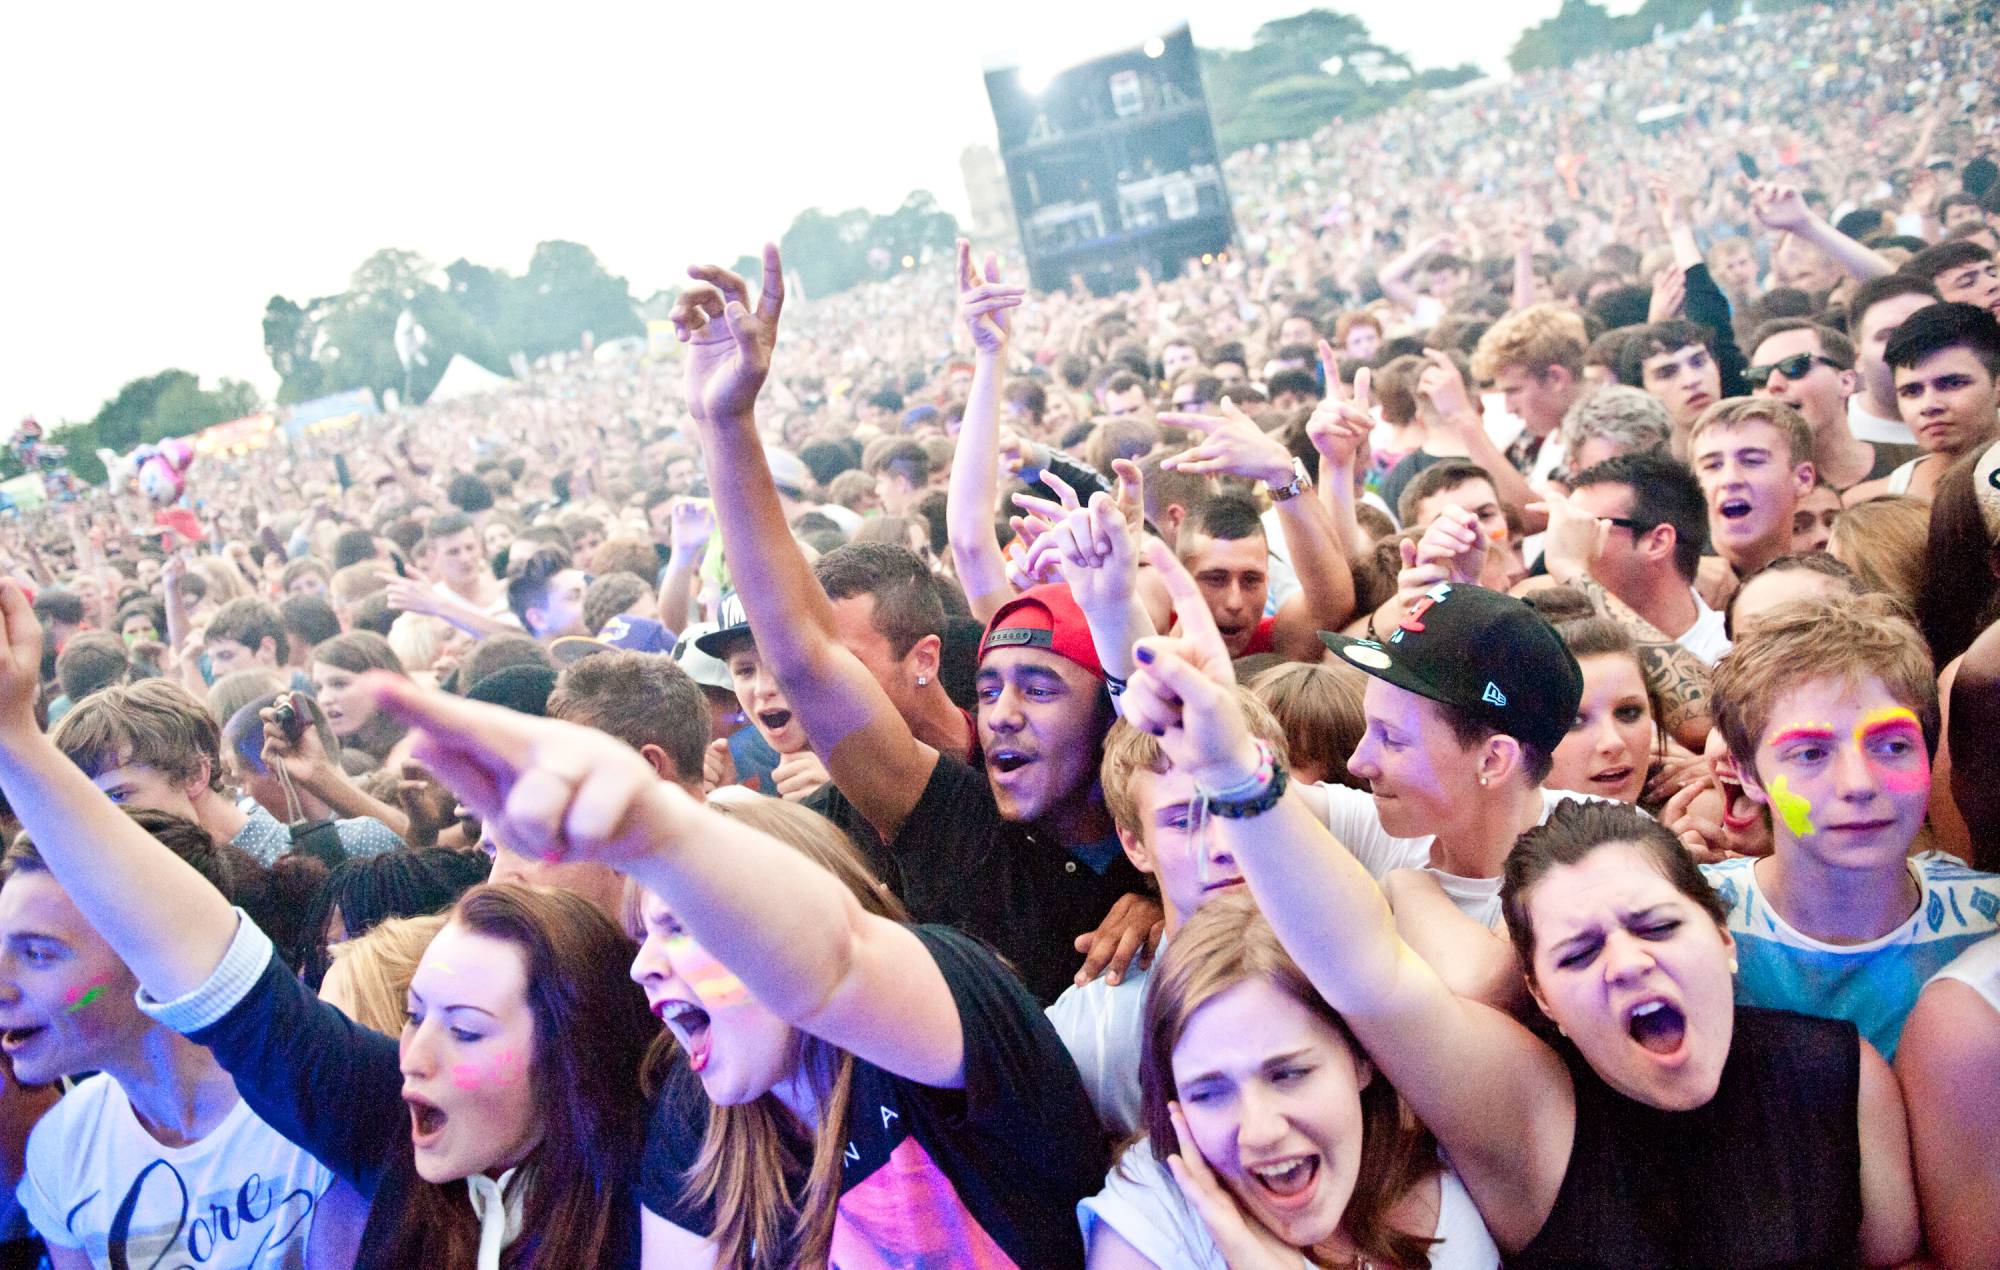 The crowd watch on as Dizzee Rascal performs on stage headlining Splendour Festival at Wollaton Park on July 21, 2012 in Nottingham, United Kingdom. (Photo by Ollie Millington/Redferns via Getty Images)